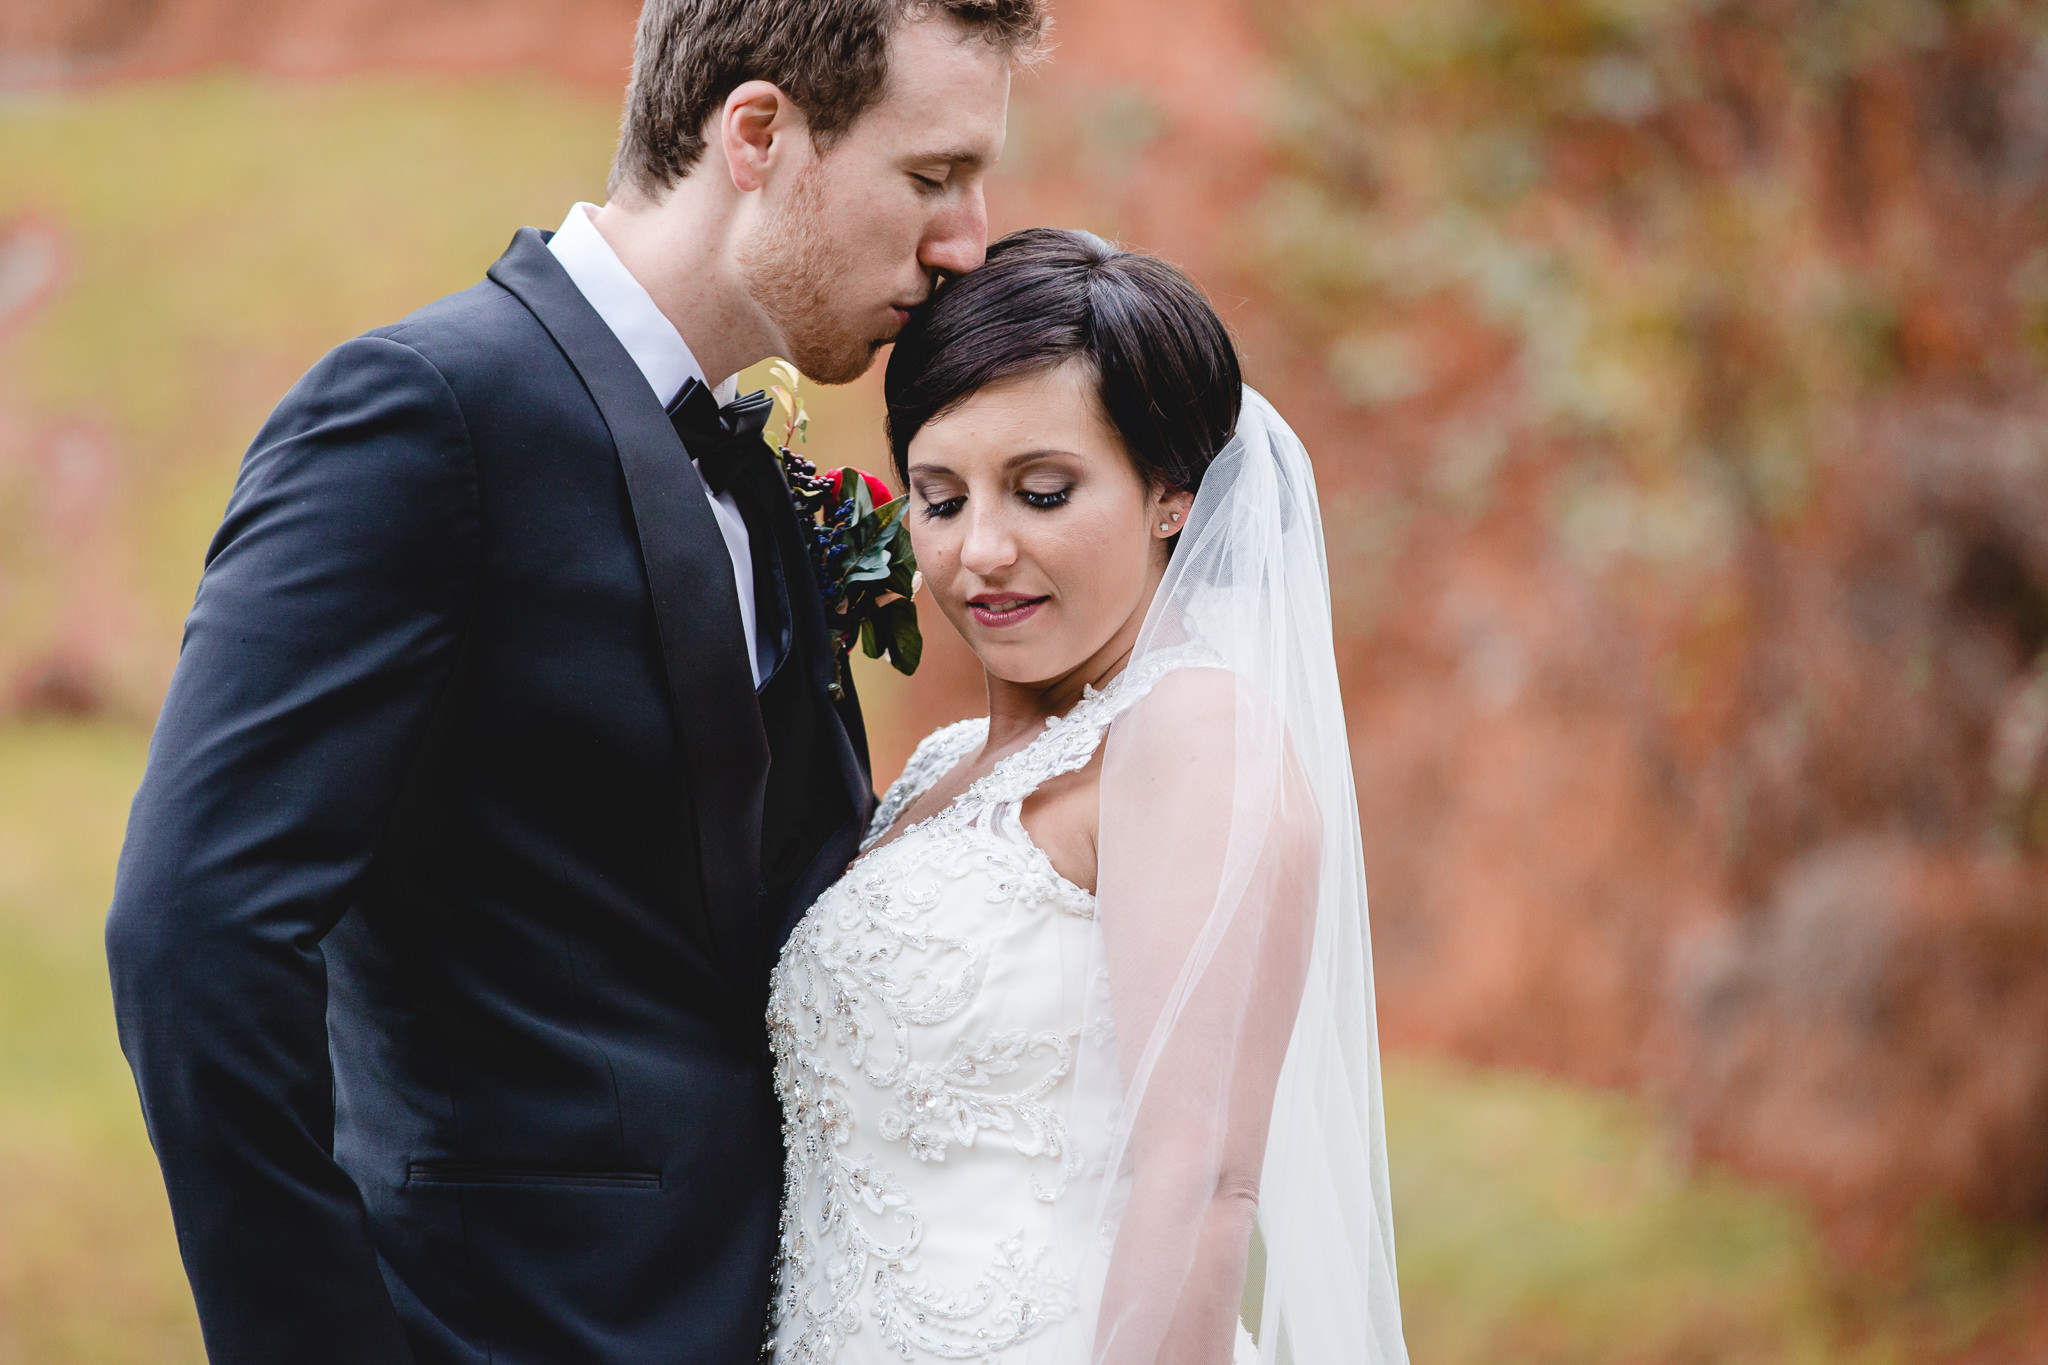 Groom kisses his bride's head during portraits for their fall wedding